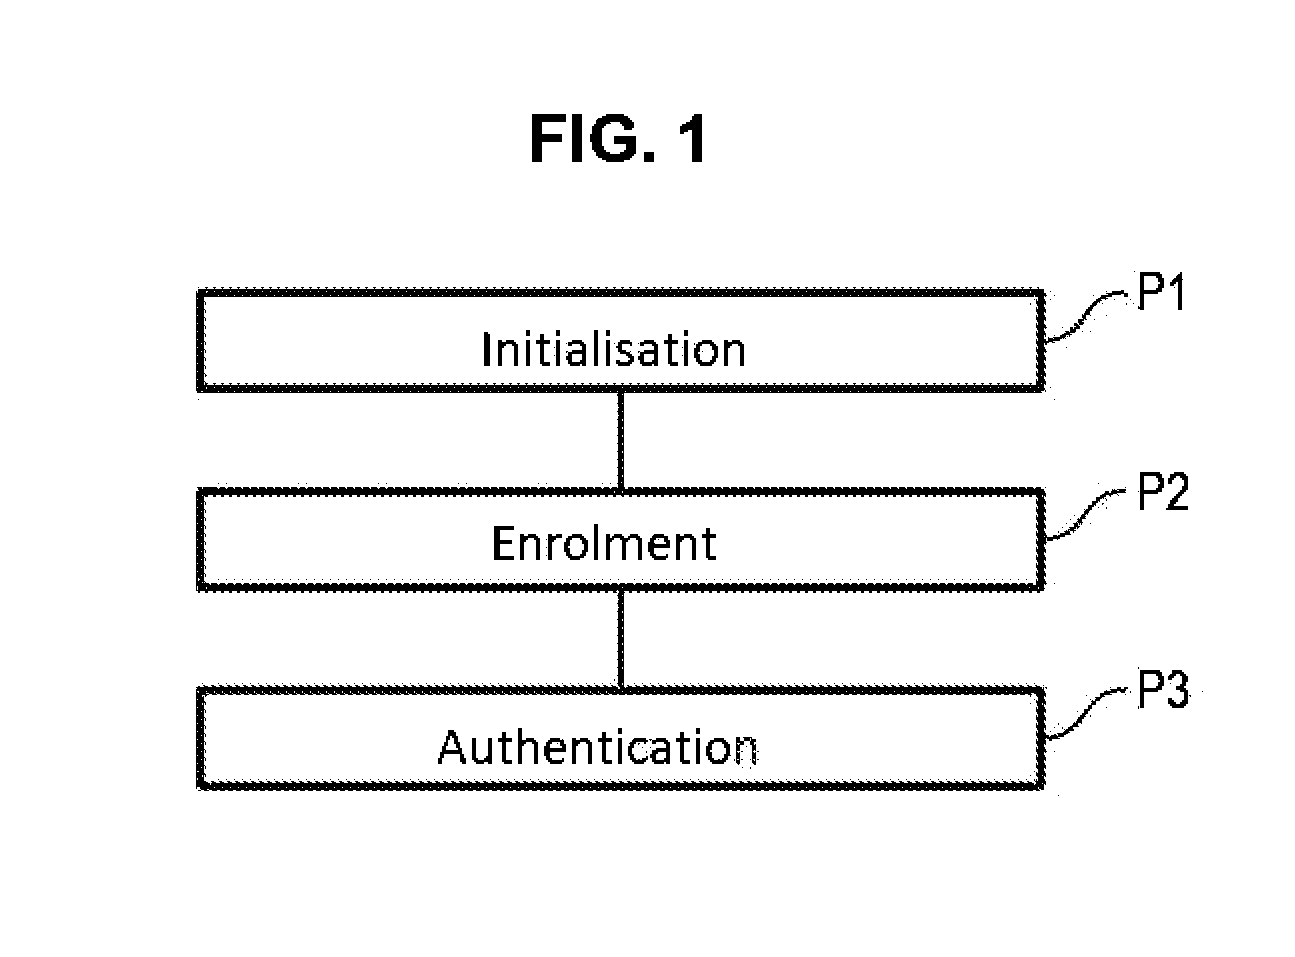 Method for Authenticating a Client Device to a Server Using a Secret Element